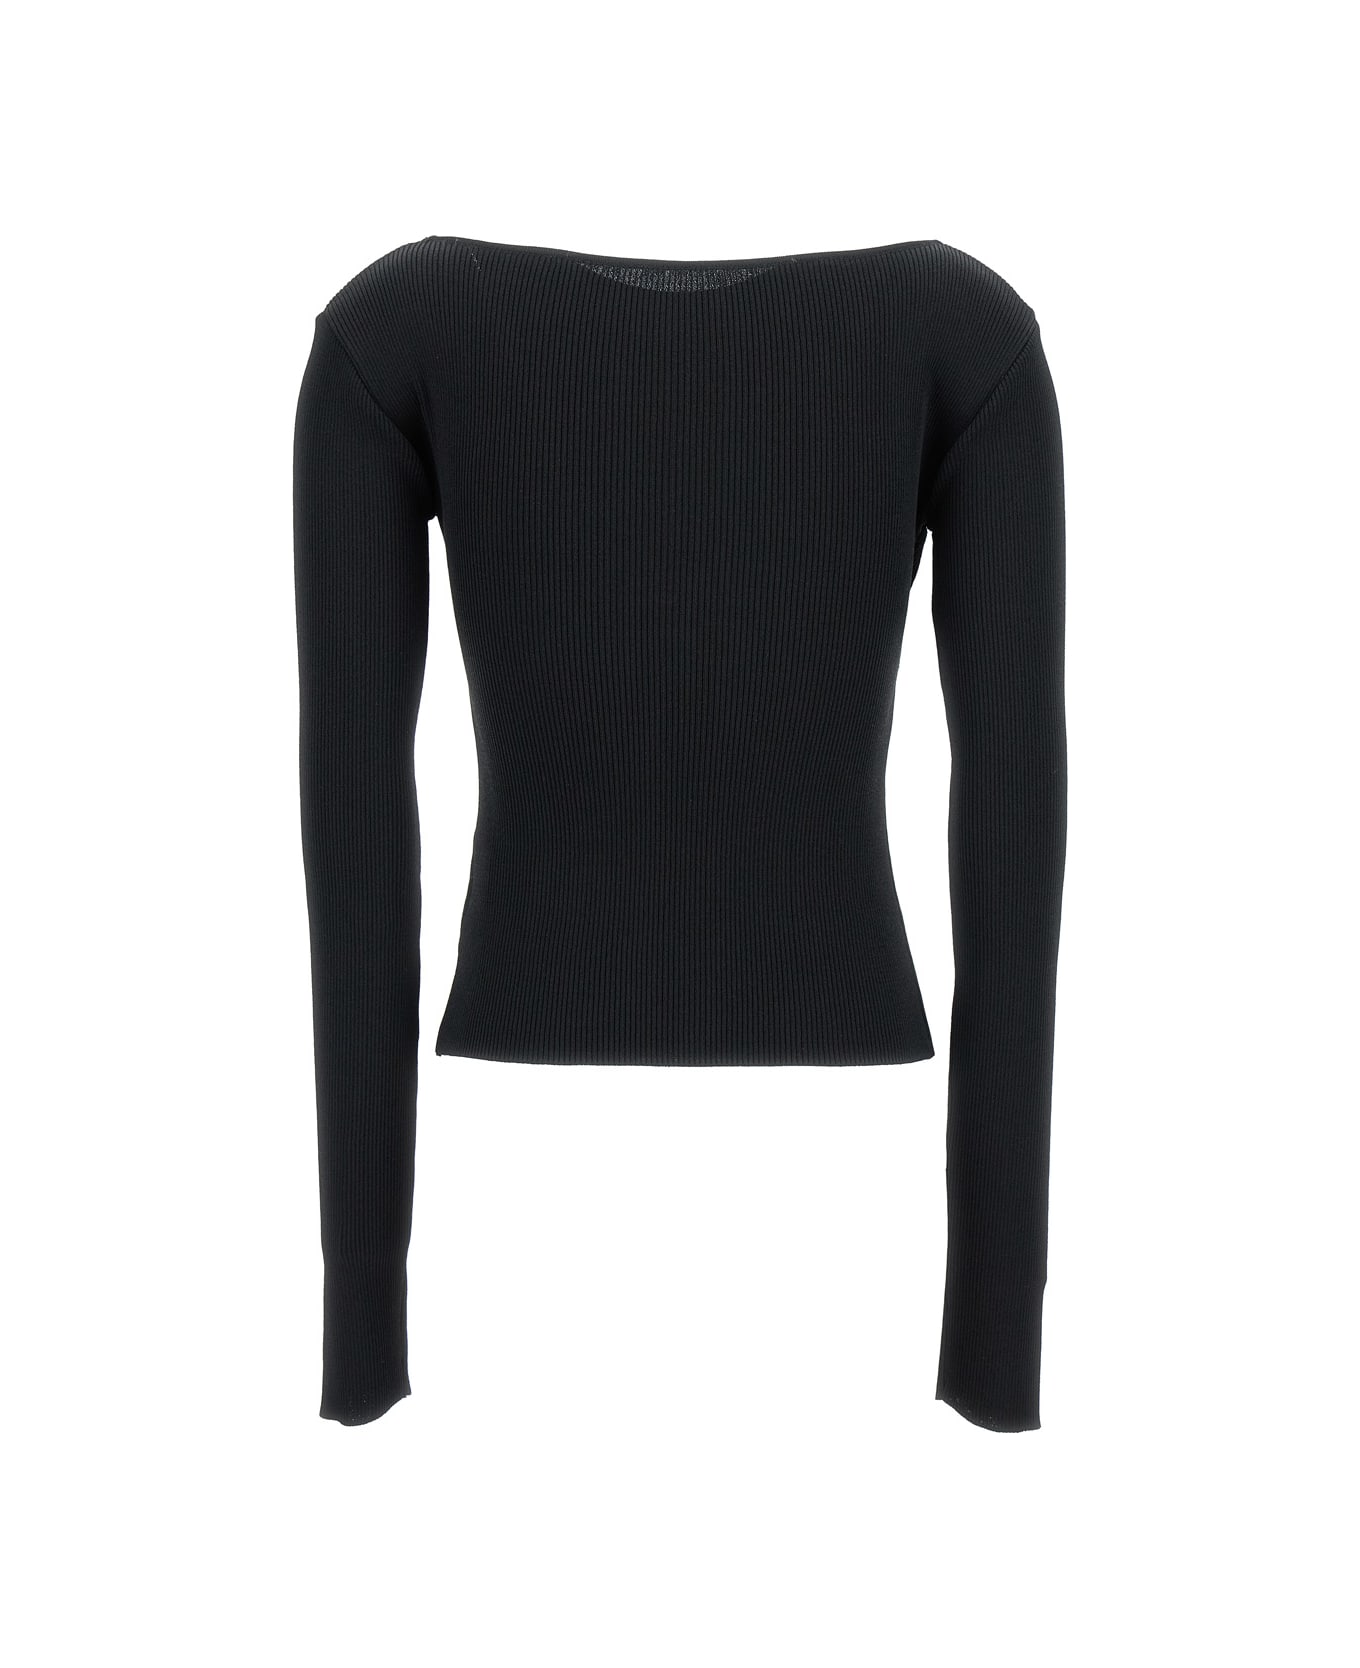 Low Classic Black Ribbed Top With Boat Neckline And Buttons In Rayon Blend Woman - Black ニットウェア